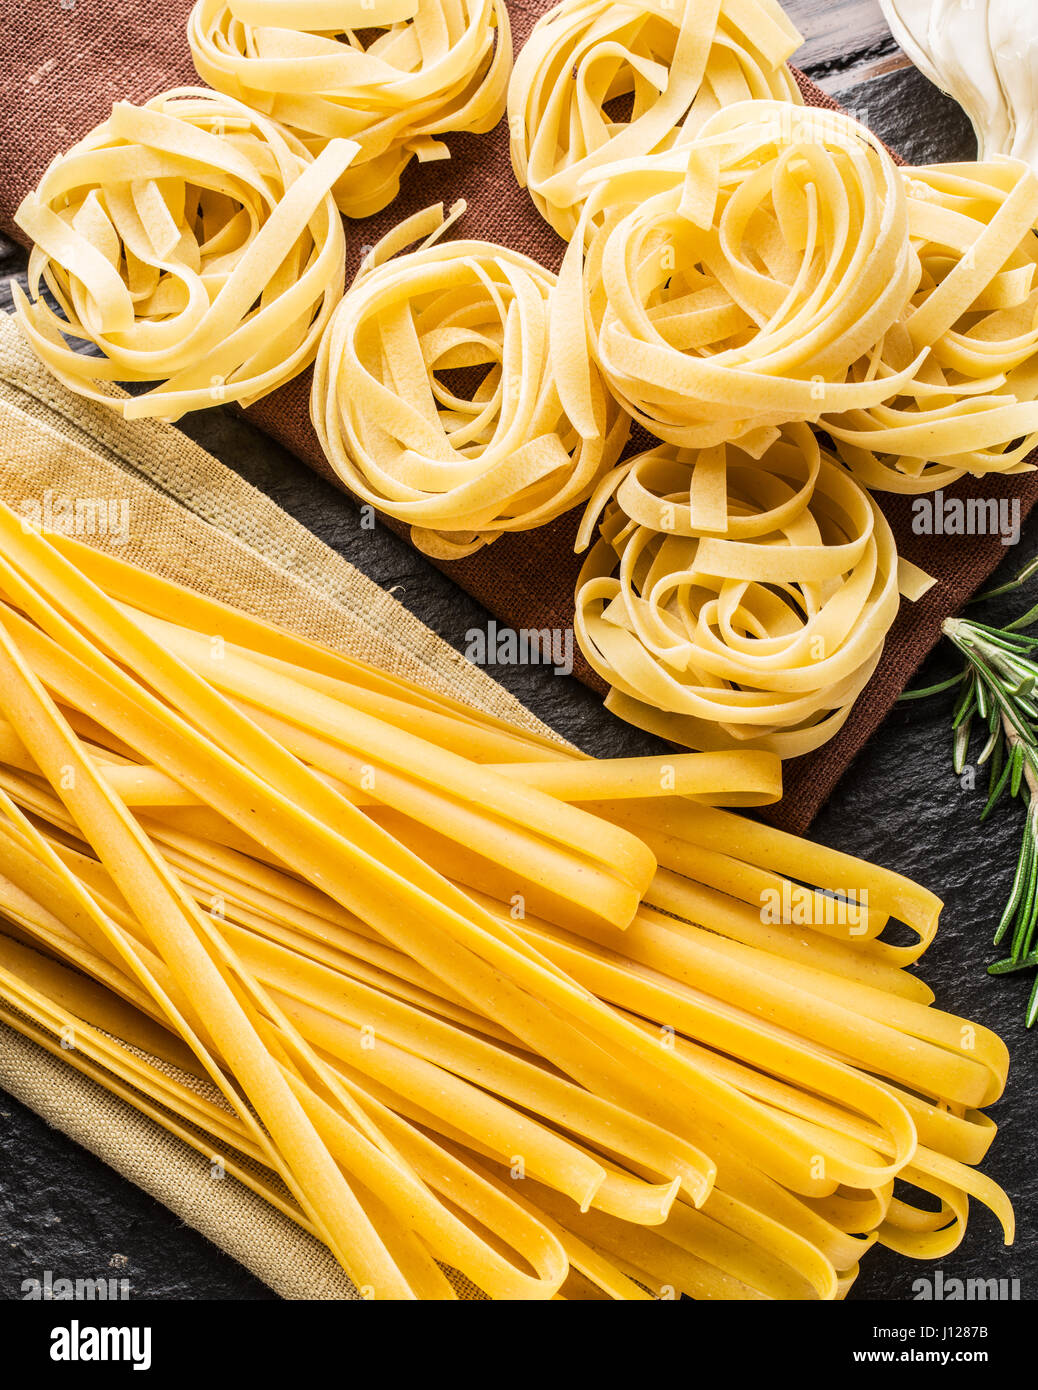 Pasta ingredients. Cherry-tomatoes, spaghetti pasta, rosemary and spices on a graphite board. Stock Photo